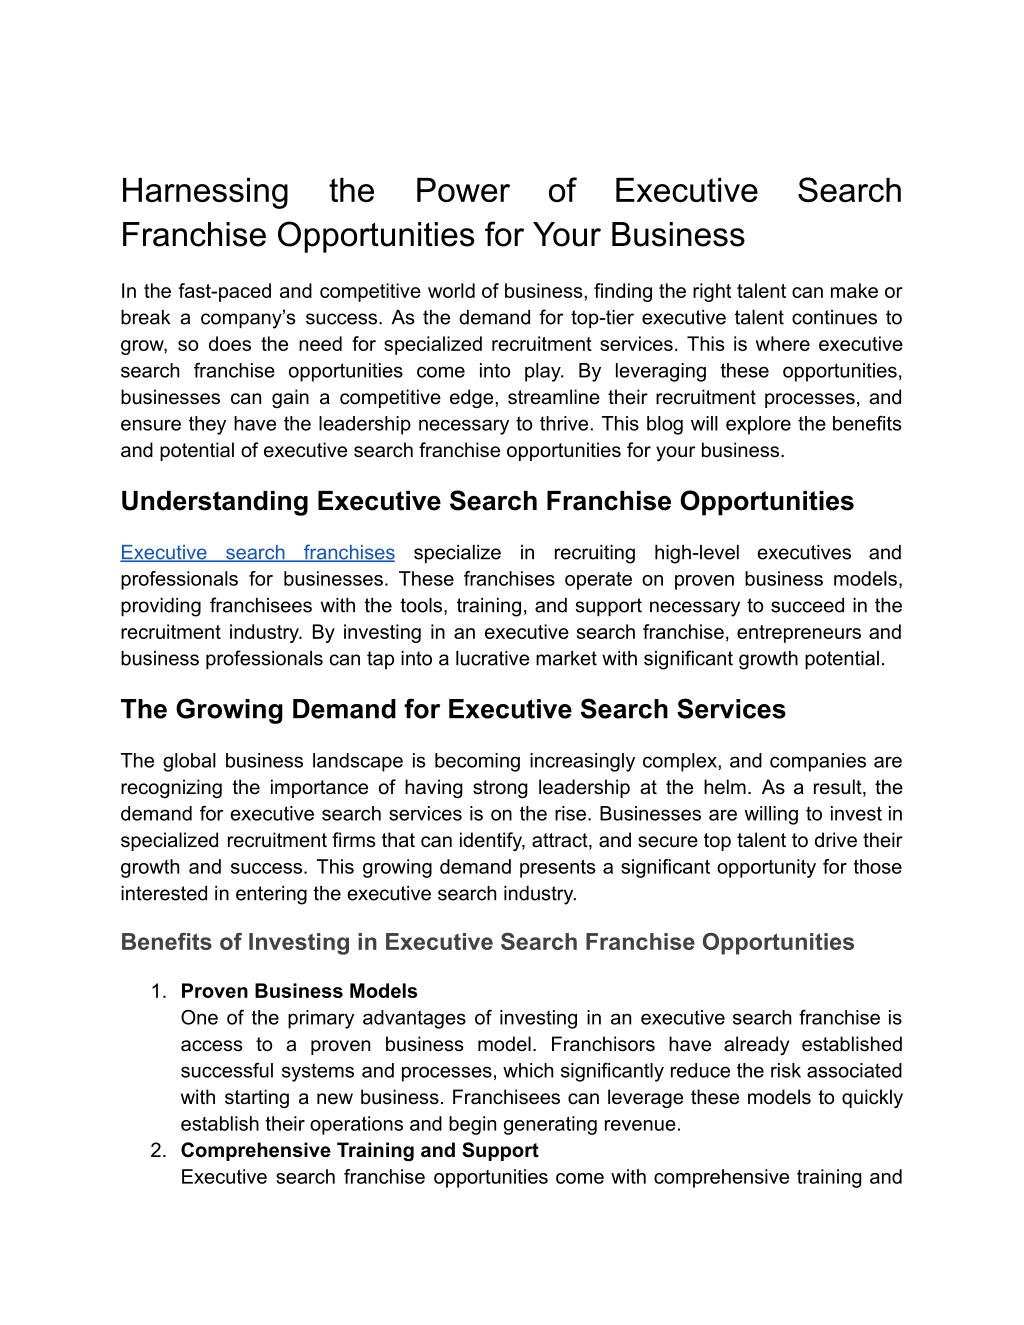 harnessing franchise opportunities for your l.w